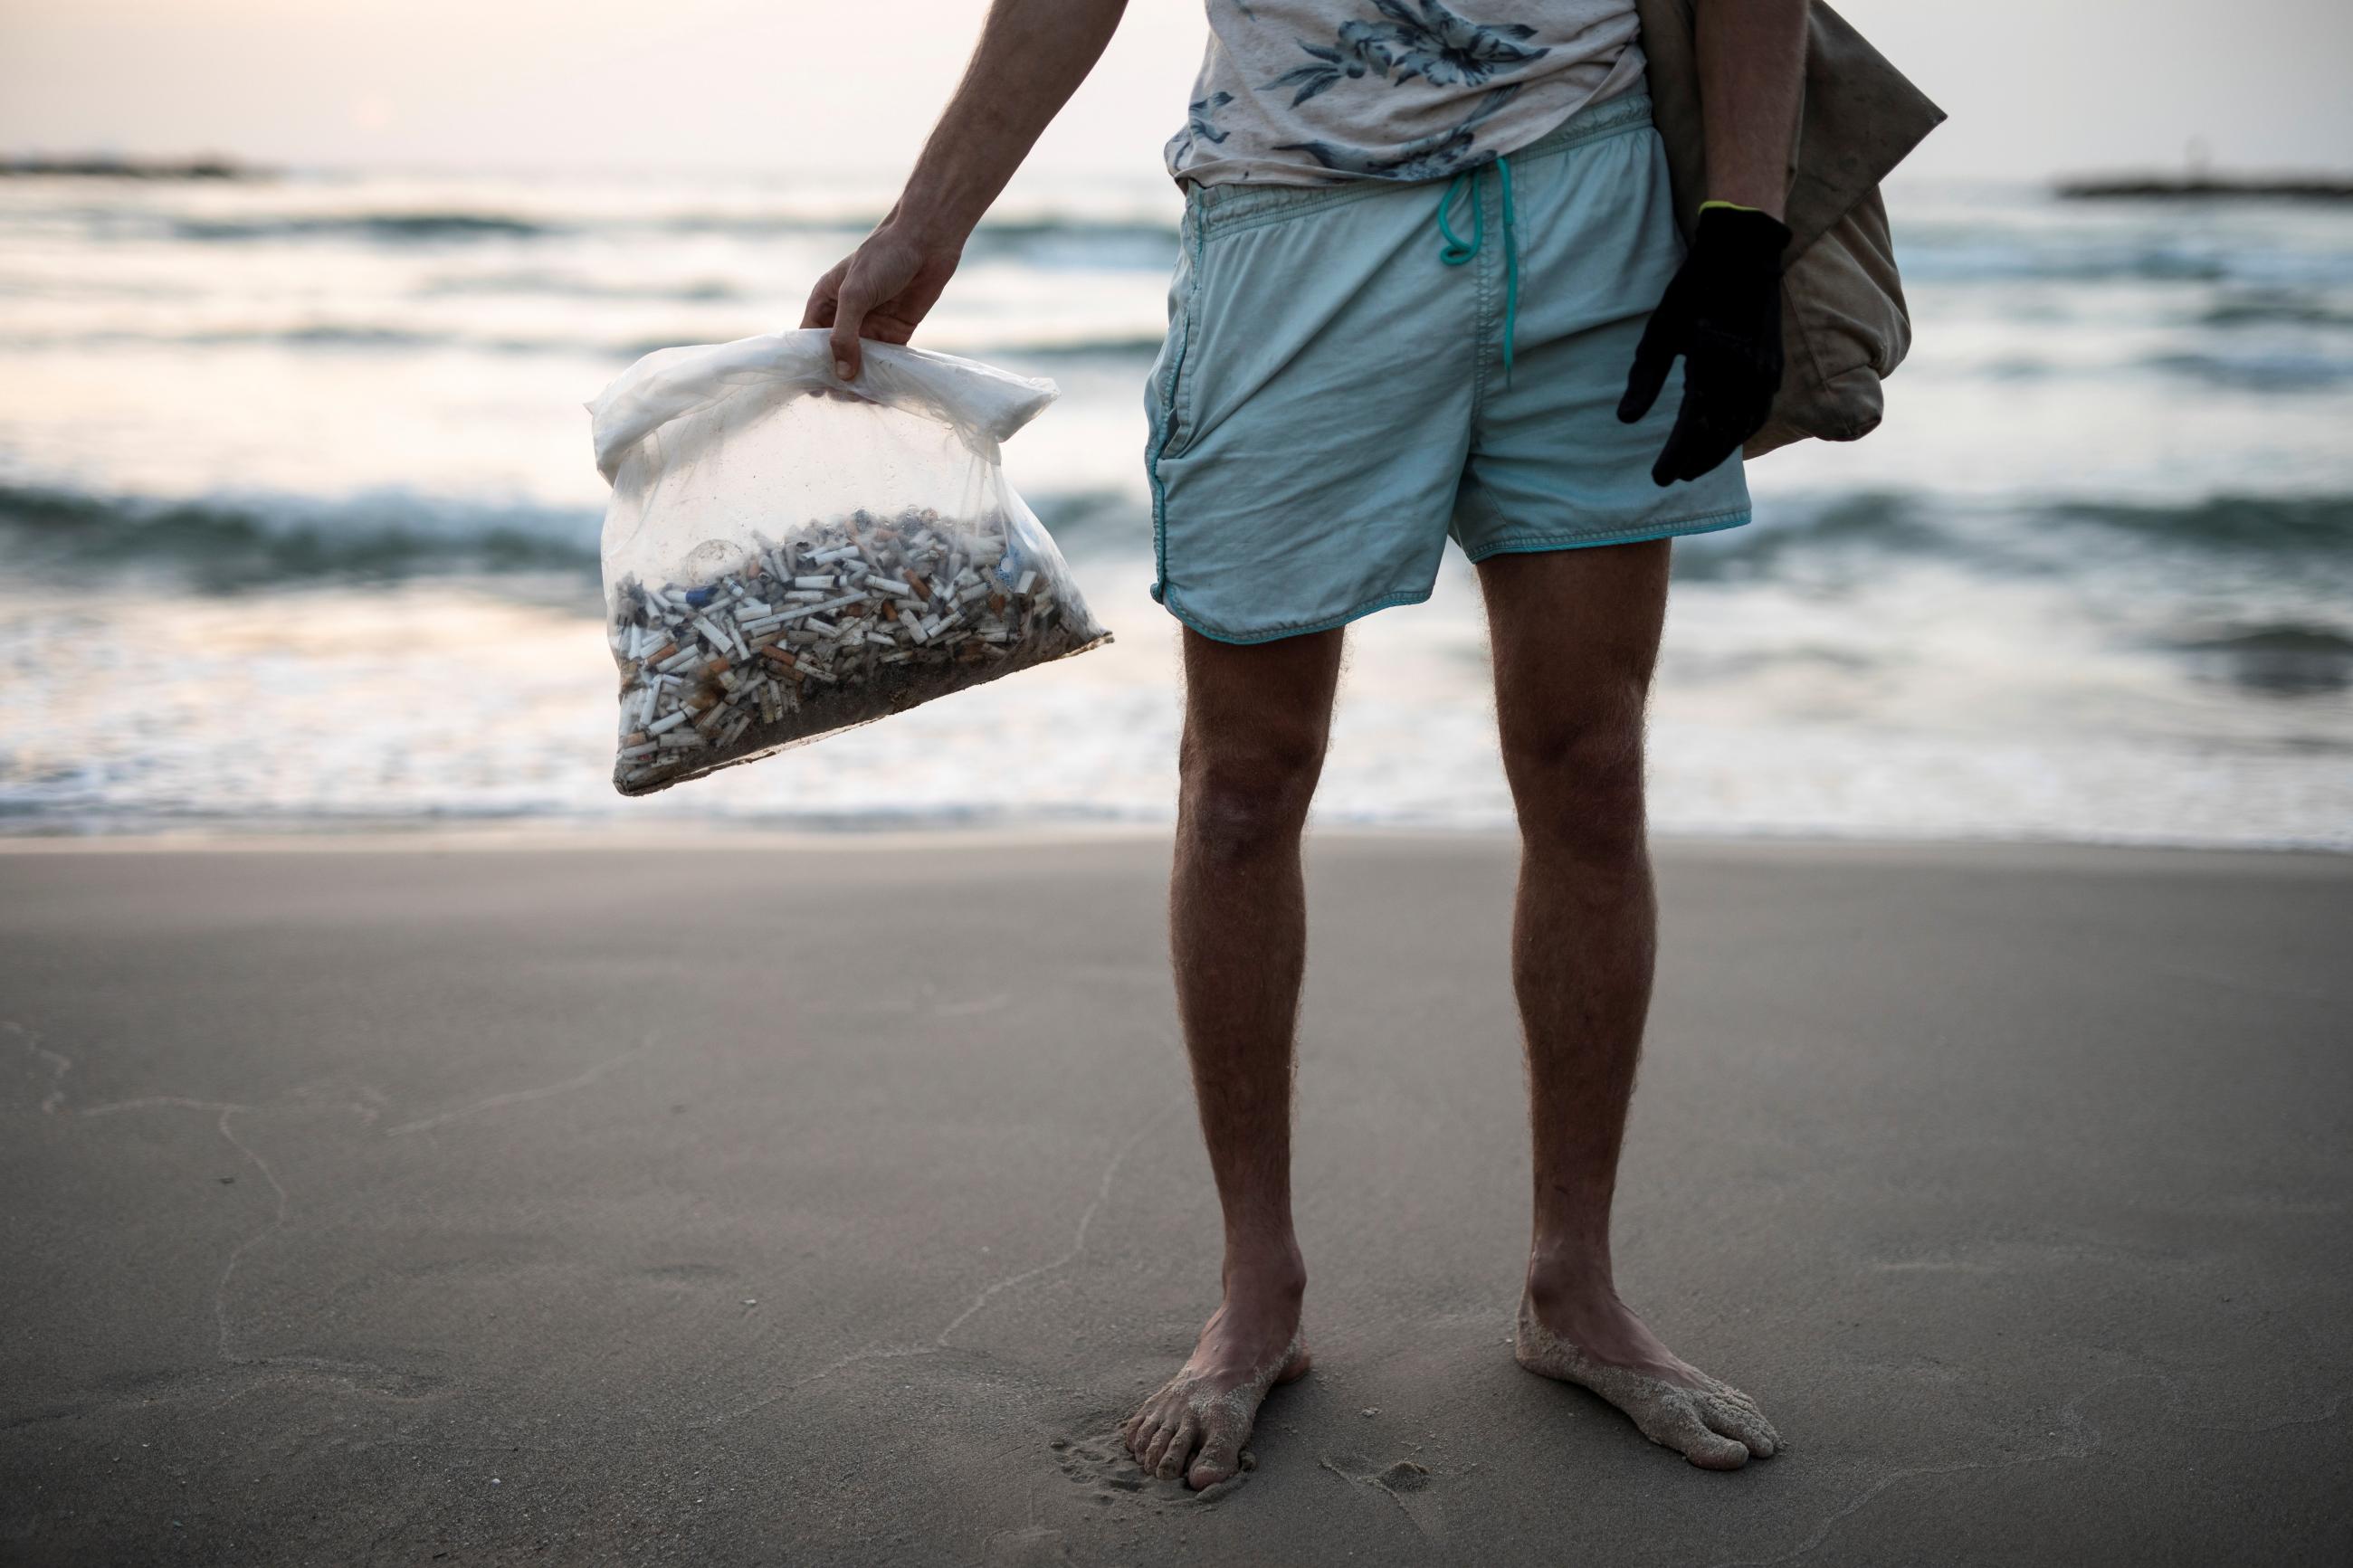 Julian Melcer (only his lower body can be seen) holds a plastic bag filled with cigarette butts he collected from the shore of the Mediterranean Sea at a beach in Tel Aviv, Israel, on April 20, 2021. 